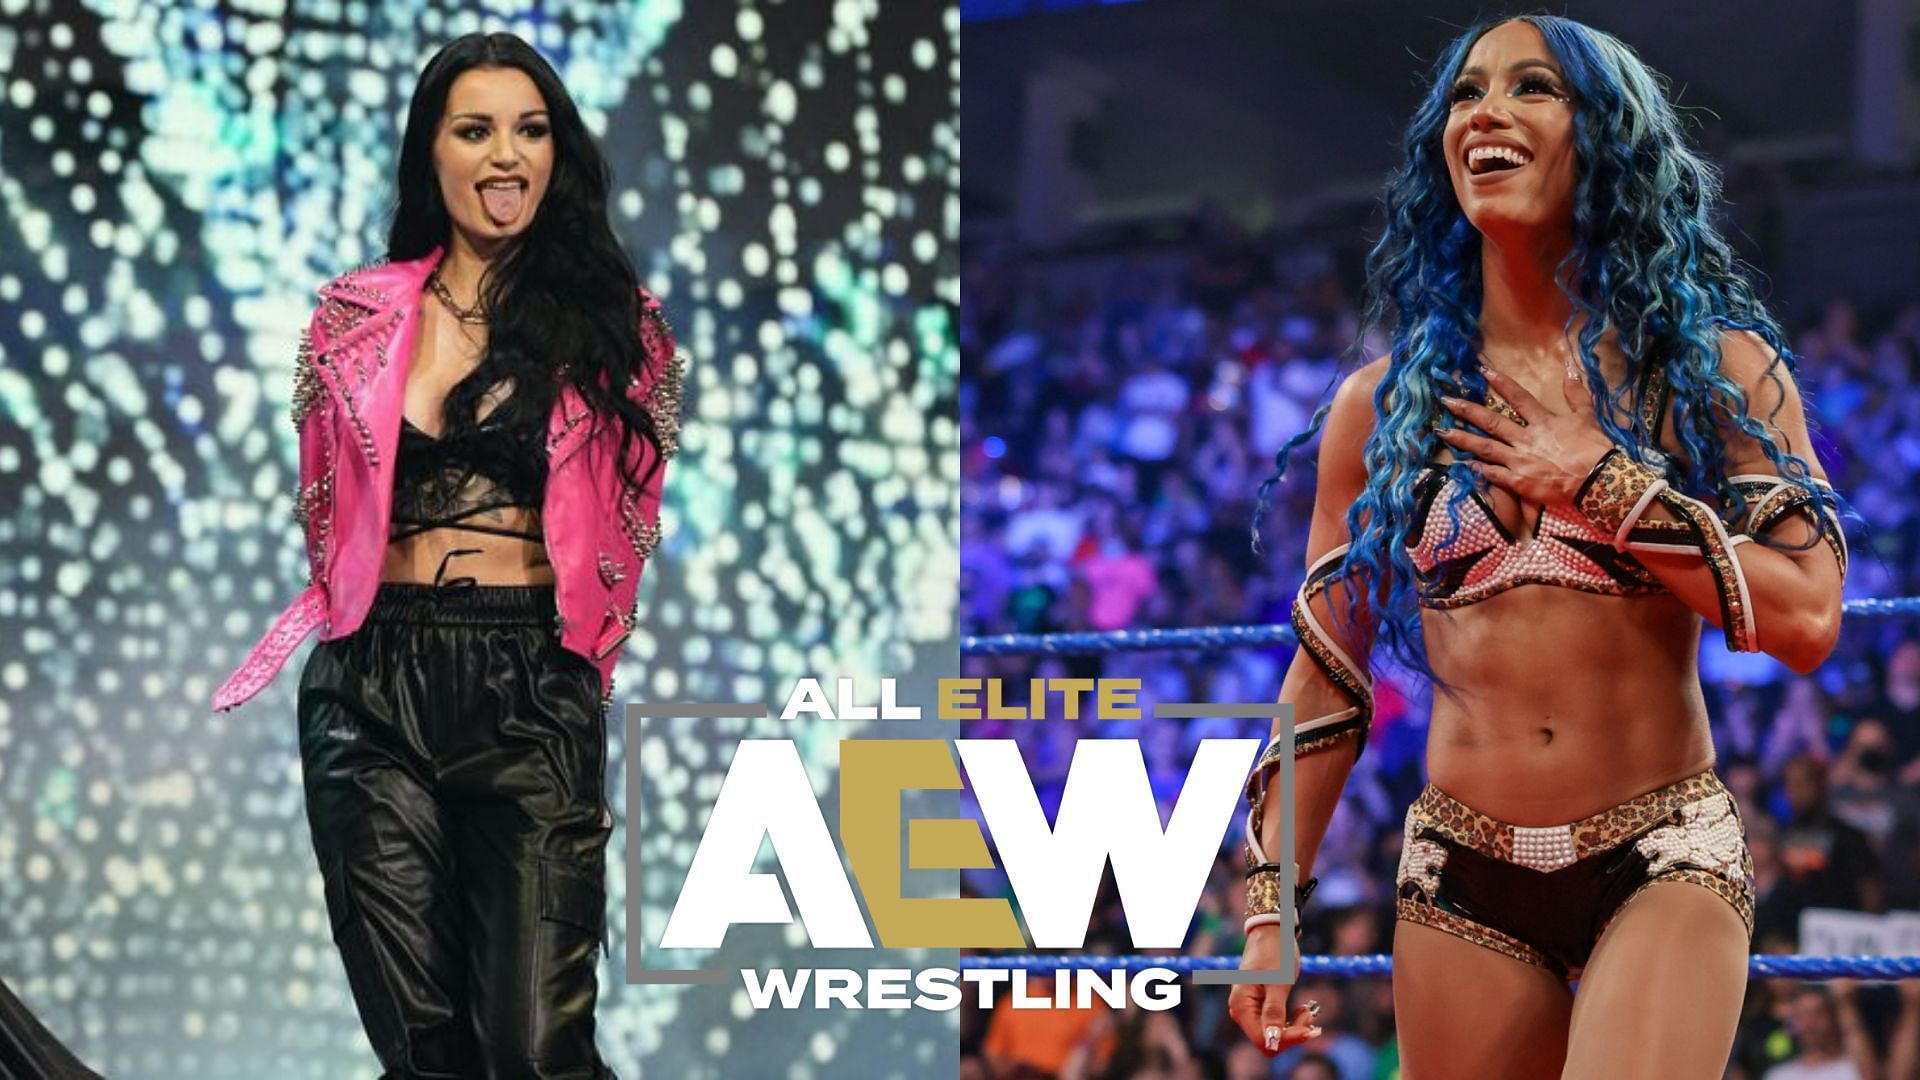 Former WWE Superstar Saraya F.K.A Paige is now in AEW. Who will follow her next?